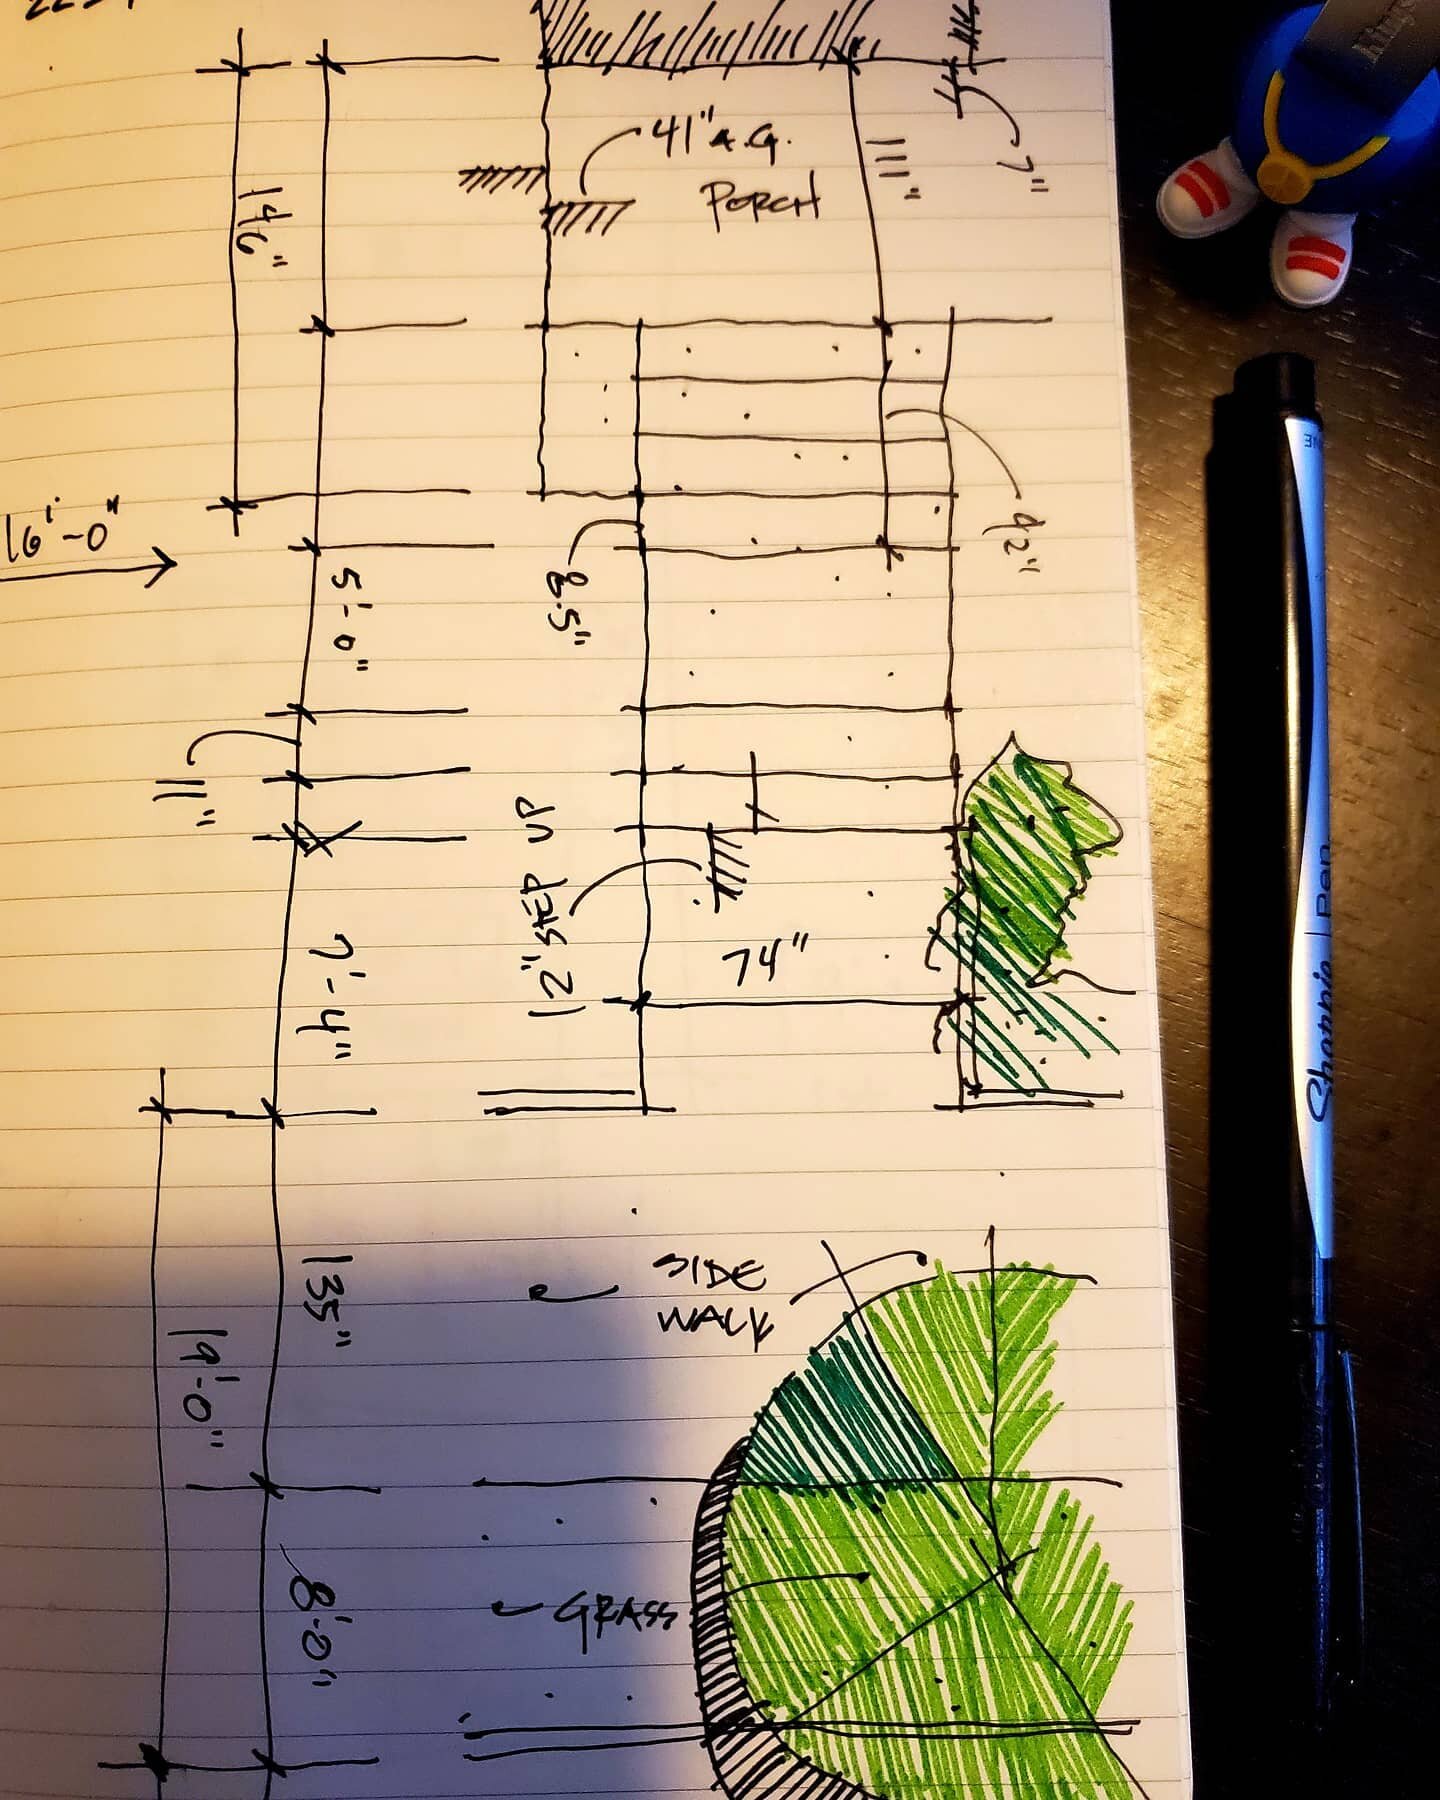 It still amazes me how this turns into reality....#247designgroup #dopearchitects #survey #whatanarchitectdoes #sketch #whatidoontheweekendsforfun